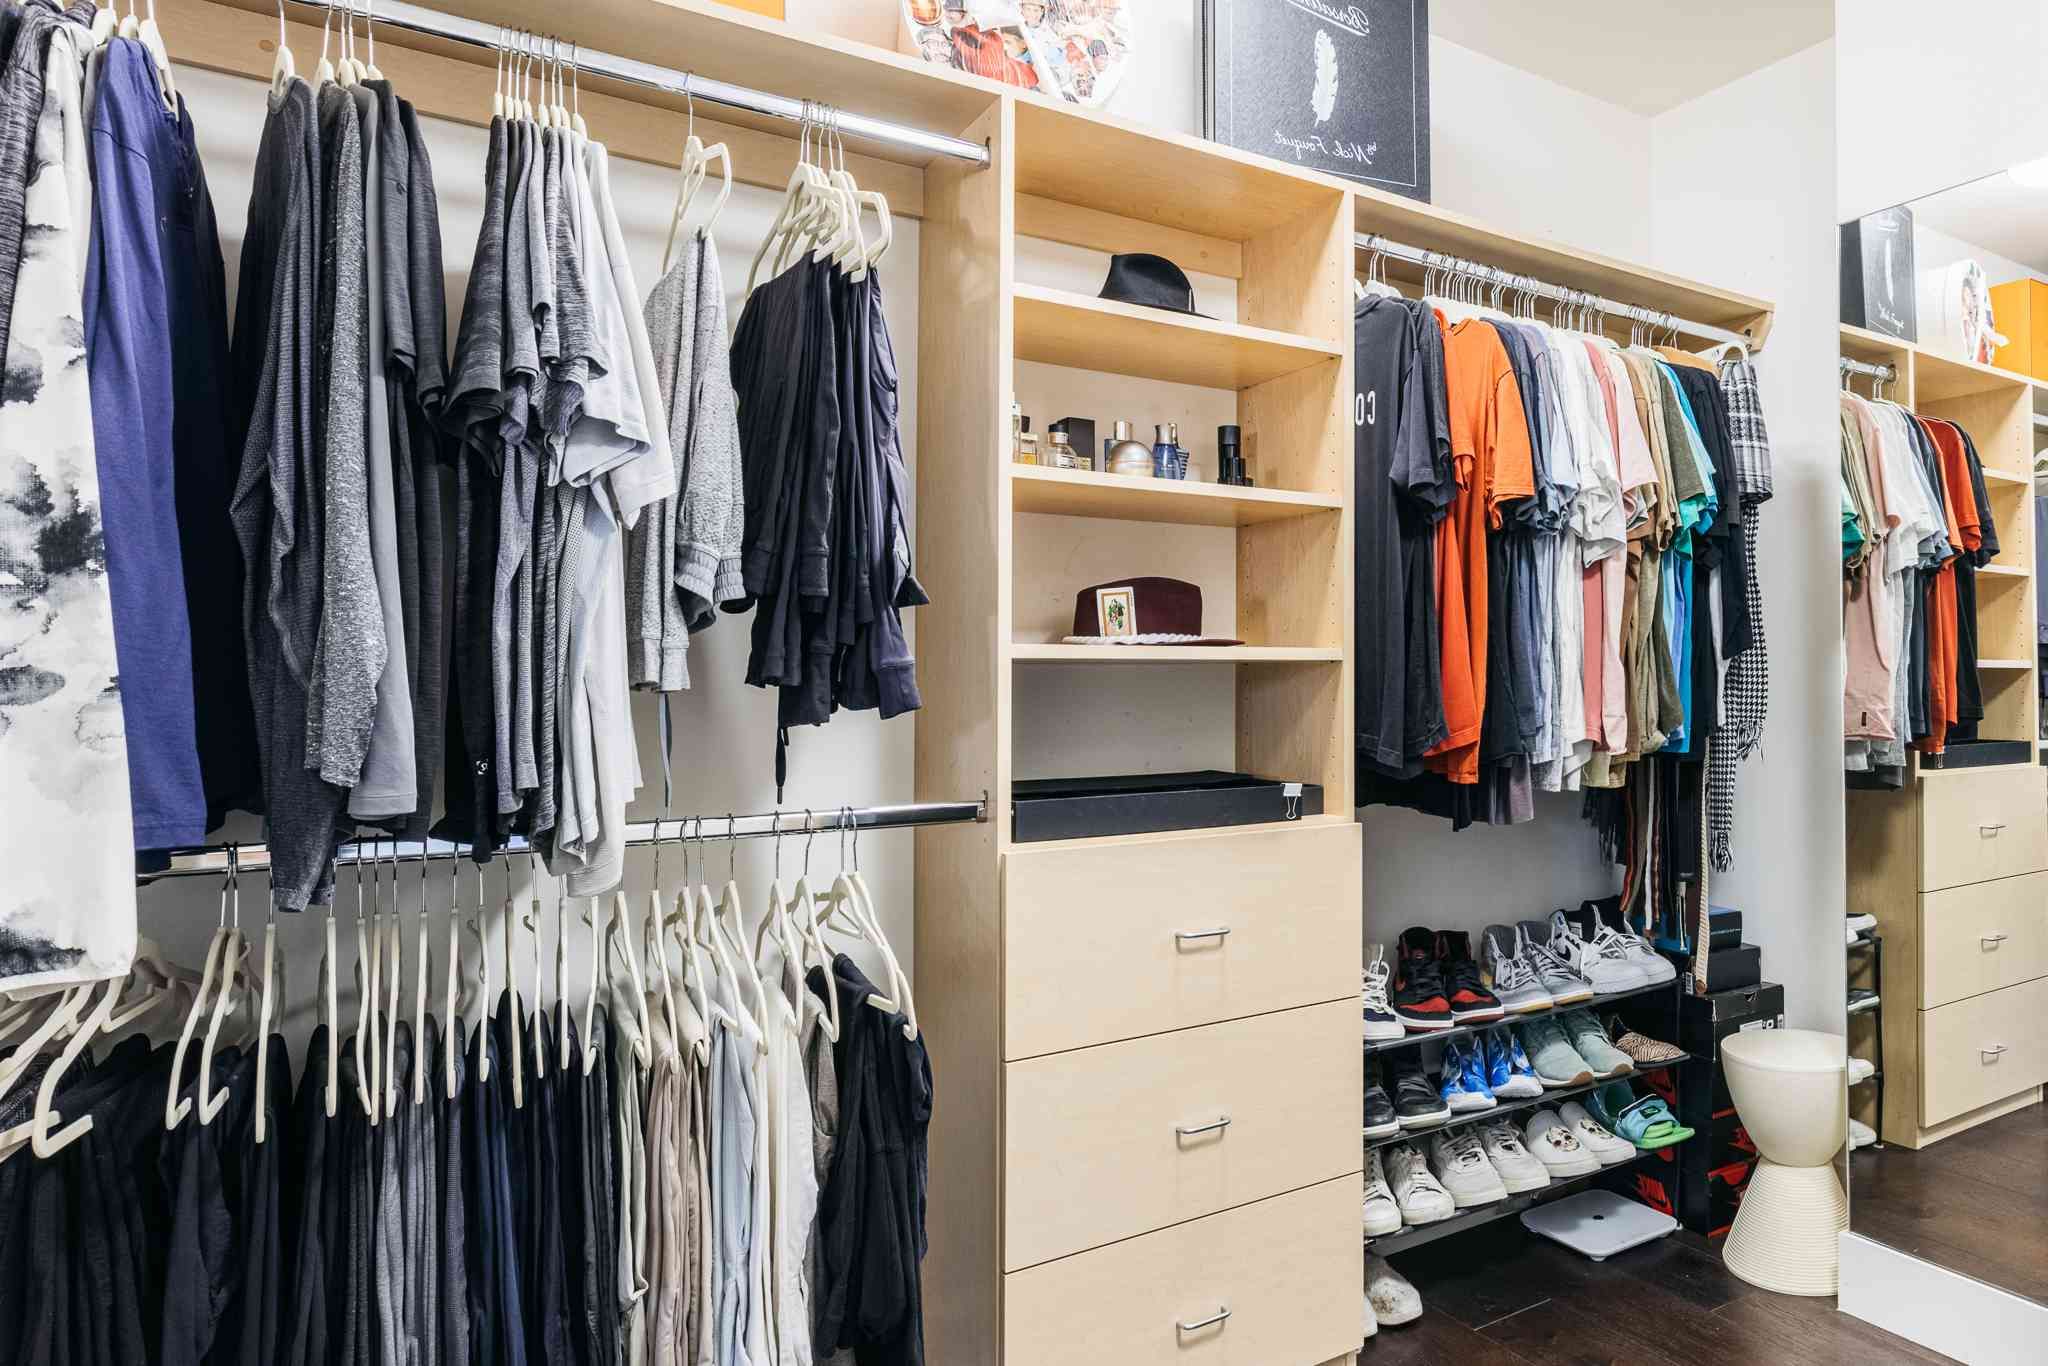 36 Walk In Closet Ideas To Optimize Your Storage Space Throughout Wardrobes Hangers Storages (View 17 of 20)